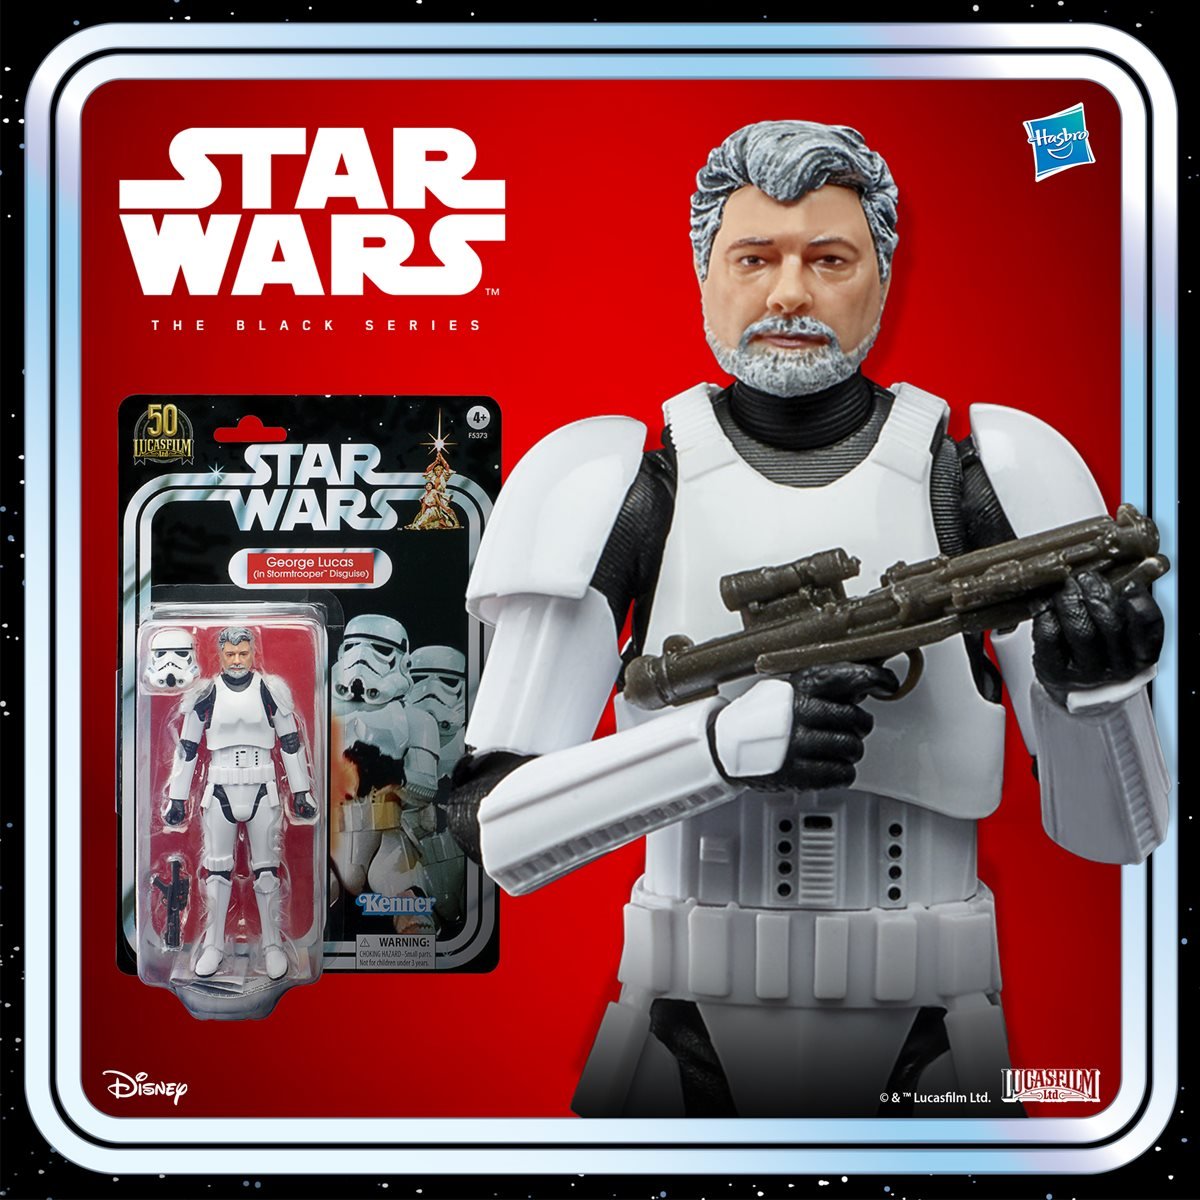 Star Wars The Black Series George Lucas (In Stormtrooper Disguise) Toy 6-inch-Scale Lucasfilm 50th Anniversary Figure